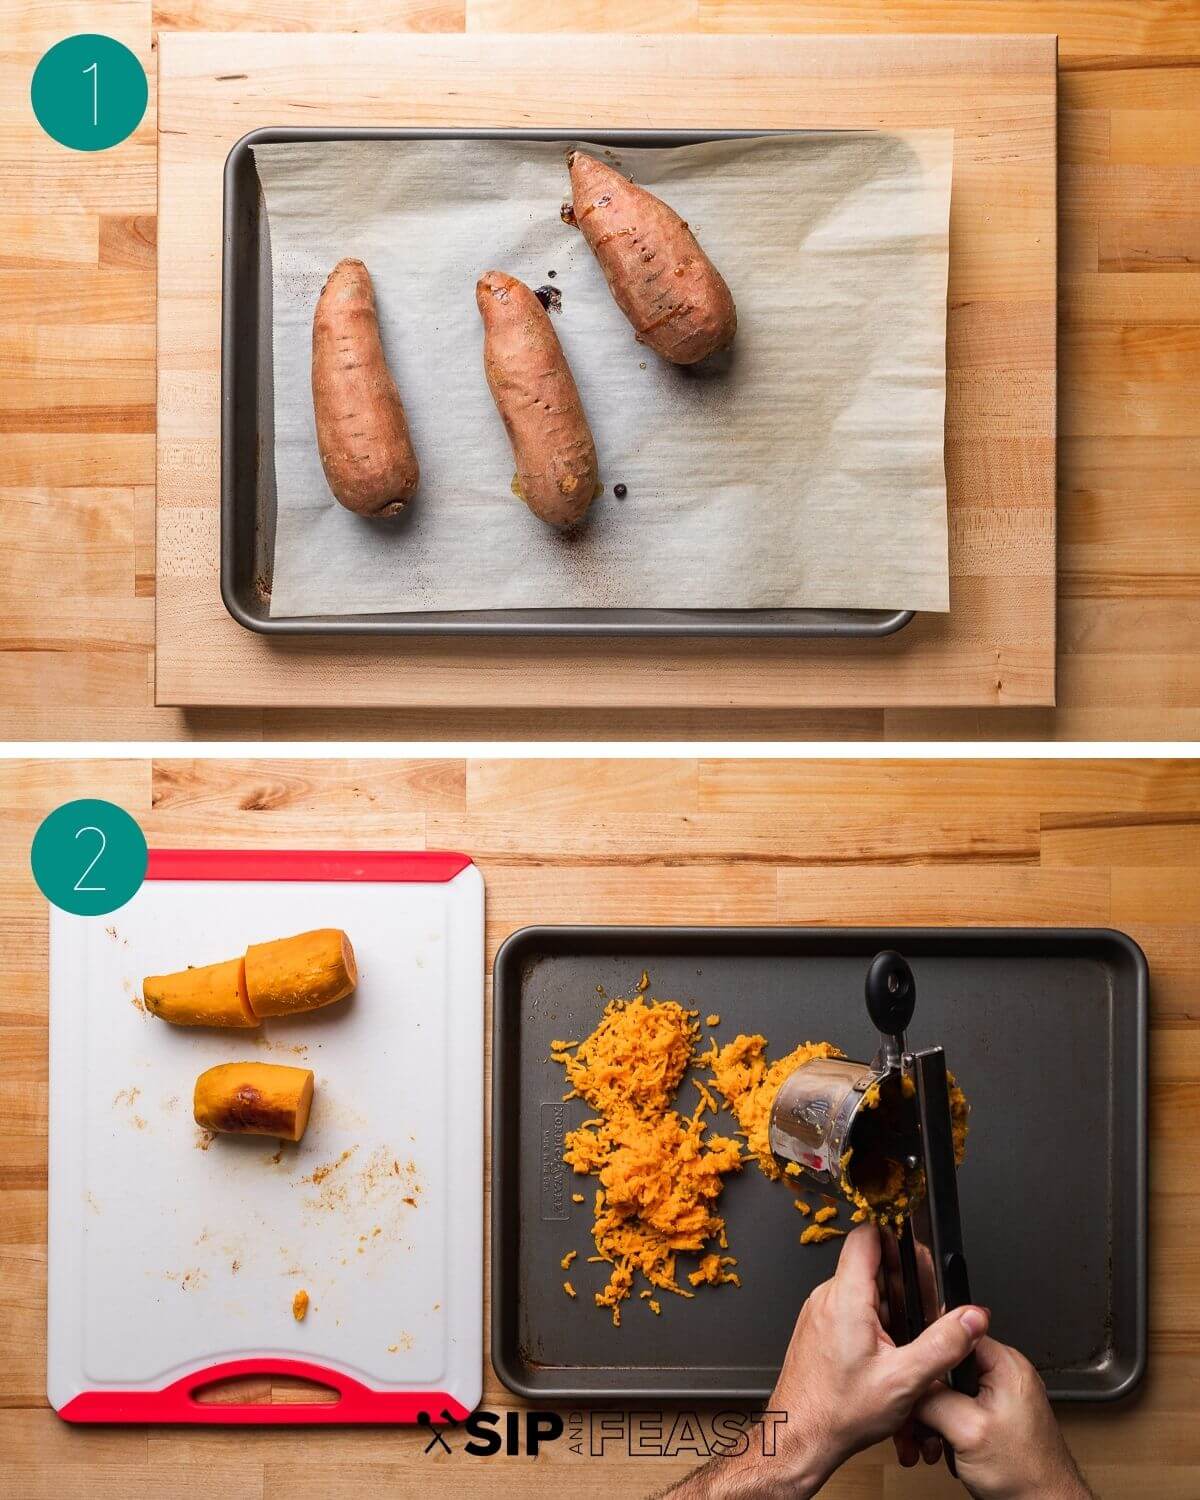 Sweet potato gnocchi process collage showing 3 baked sweet potatoes and ricing.